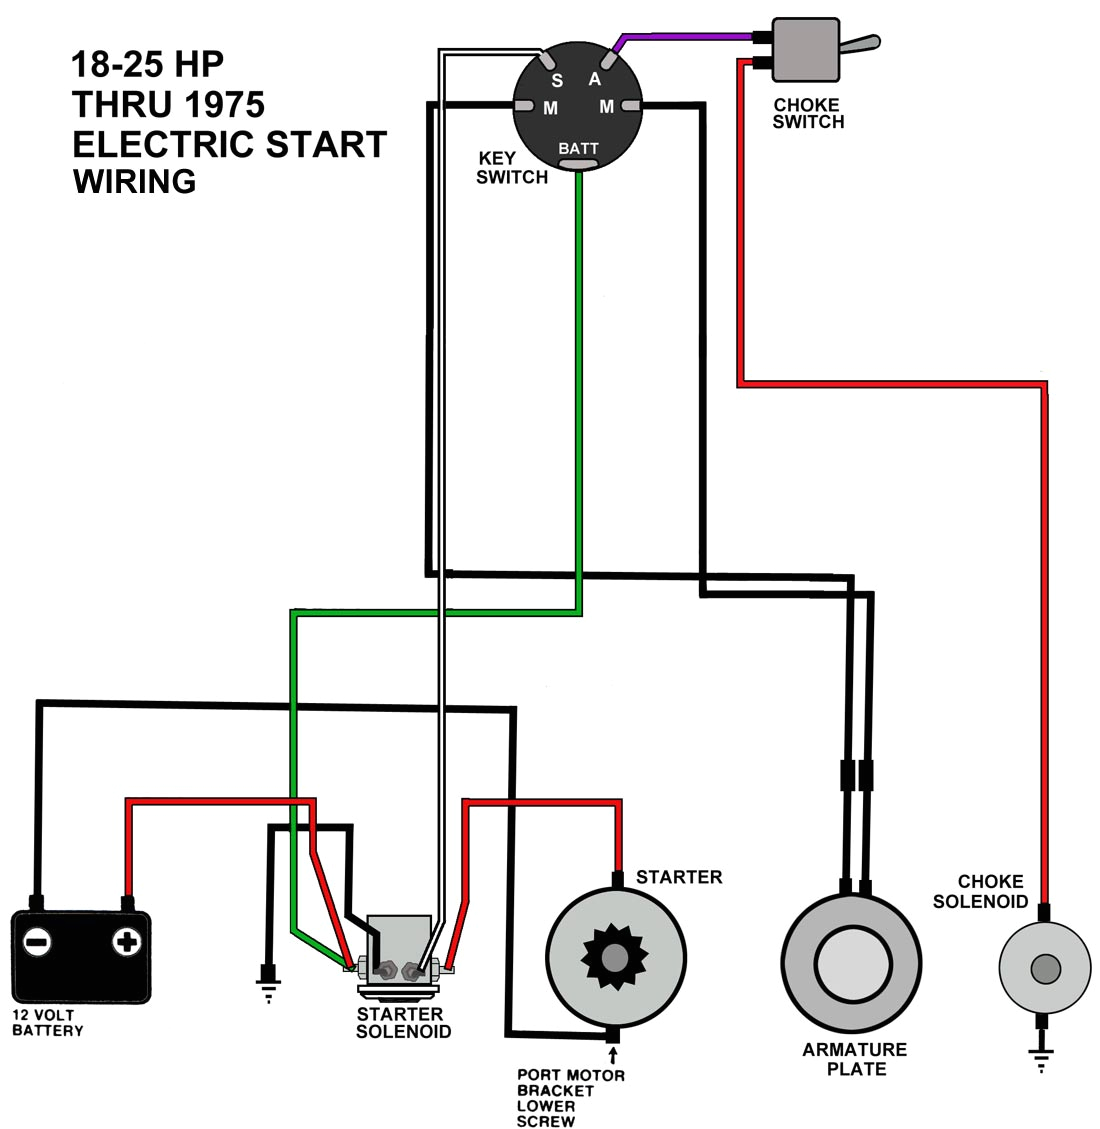 agm ignition switch wiring wiring diagrams for agm ignition switch wiring